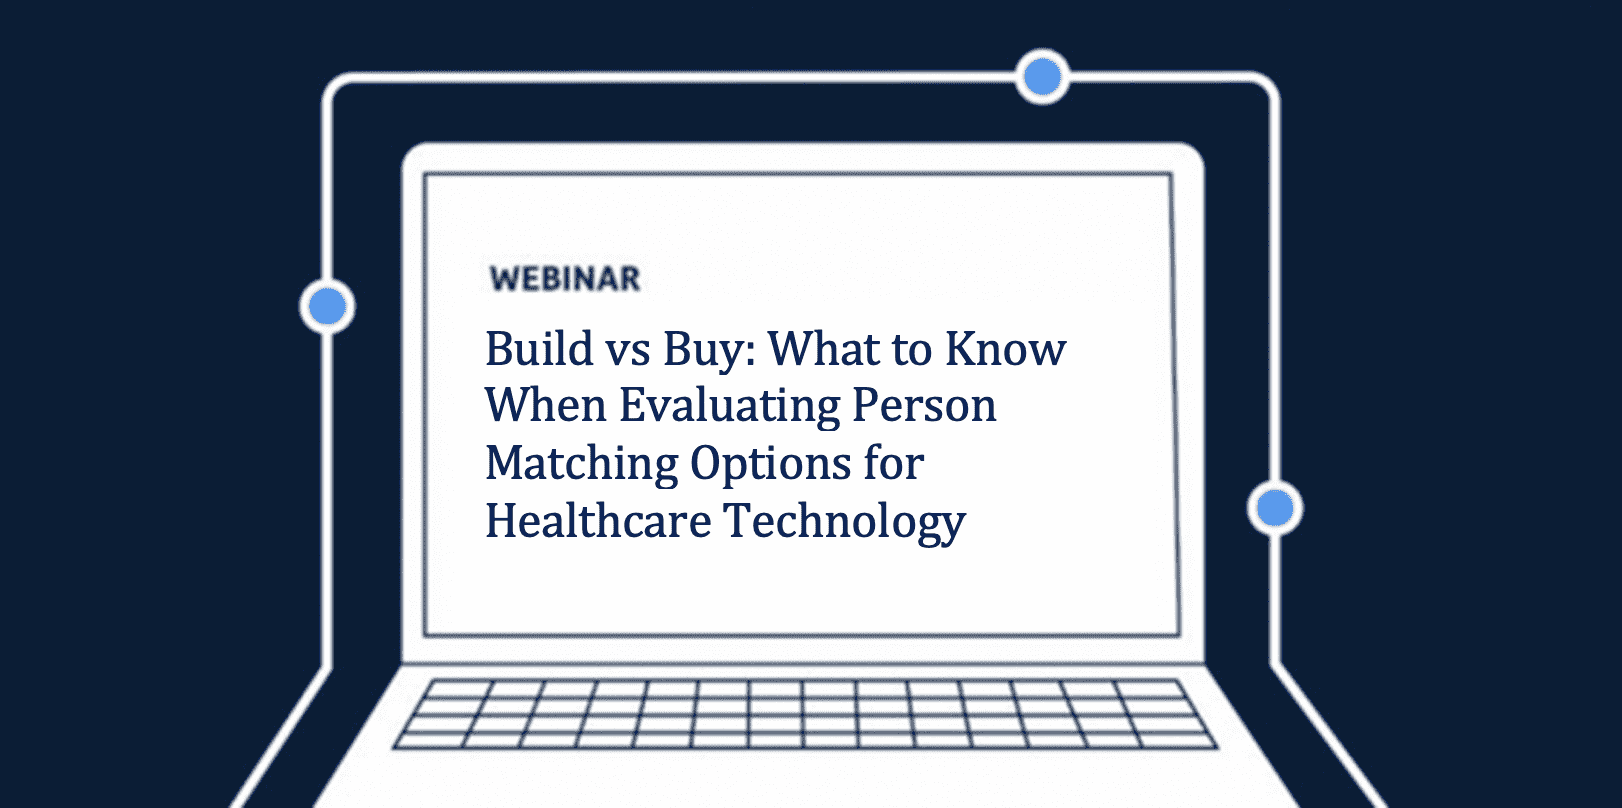 Webinar: Buy vs Build: What to Know When Evaluating Person Matching Options for Healthcare Technology